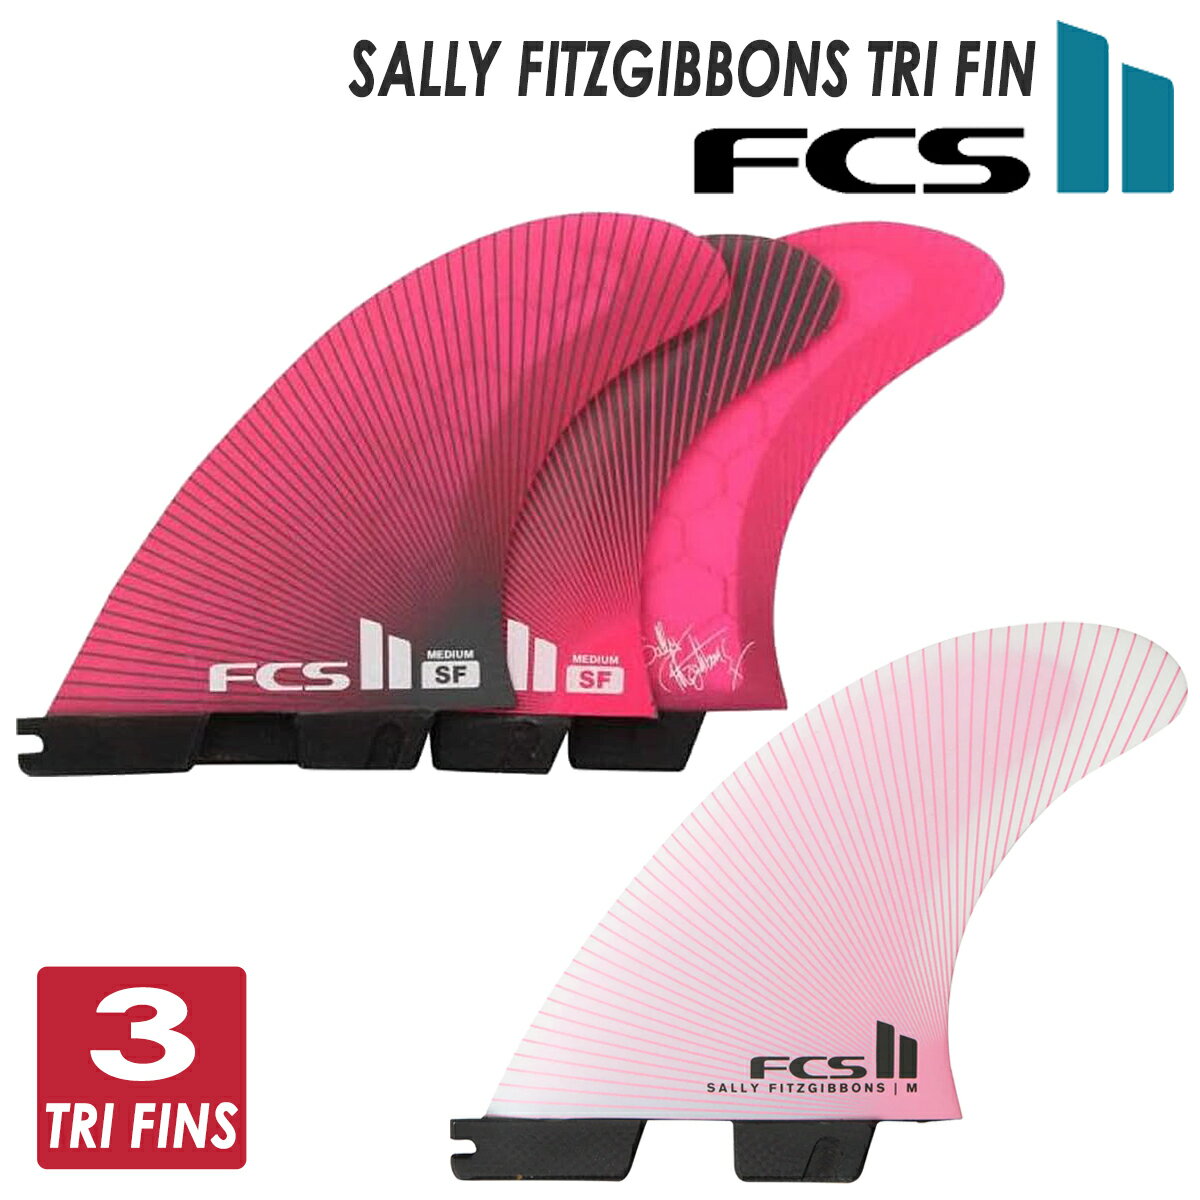 24 FCS2 フィン SF サリー・フィッツギボンズ PC Tri Fins トライフィン パフォーマンスコア 3フィン 3本セット Sally Fitzgibbons FCSII 日本正規品